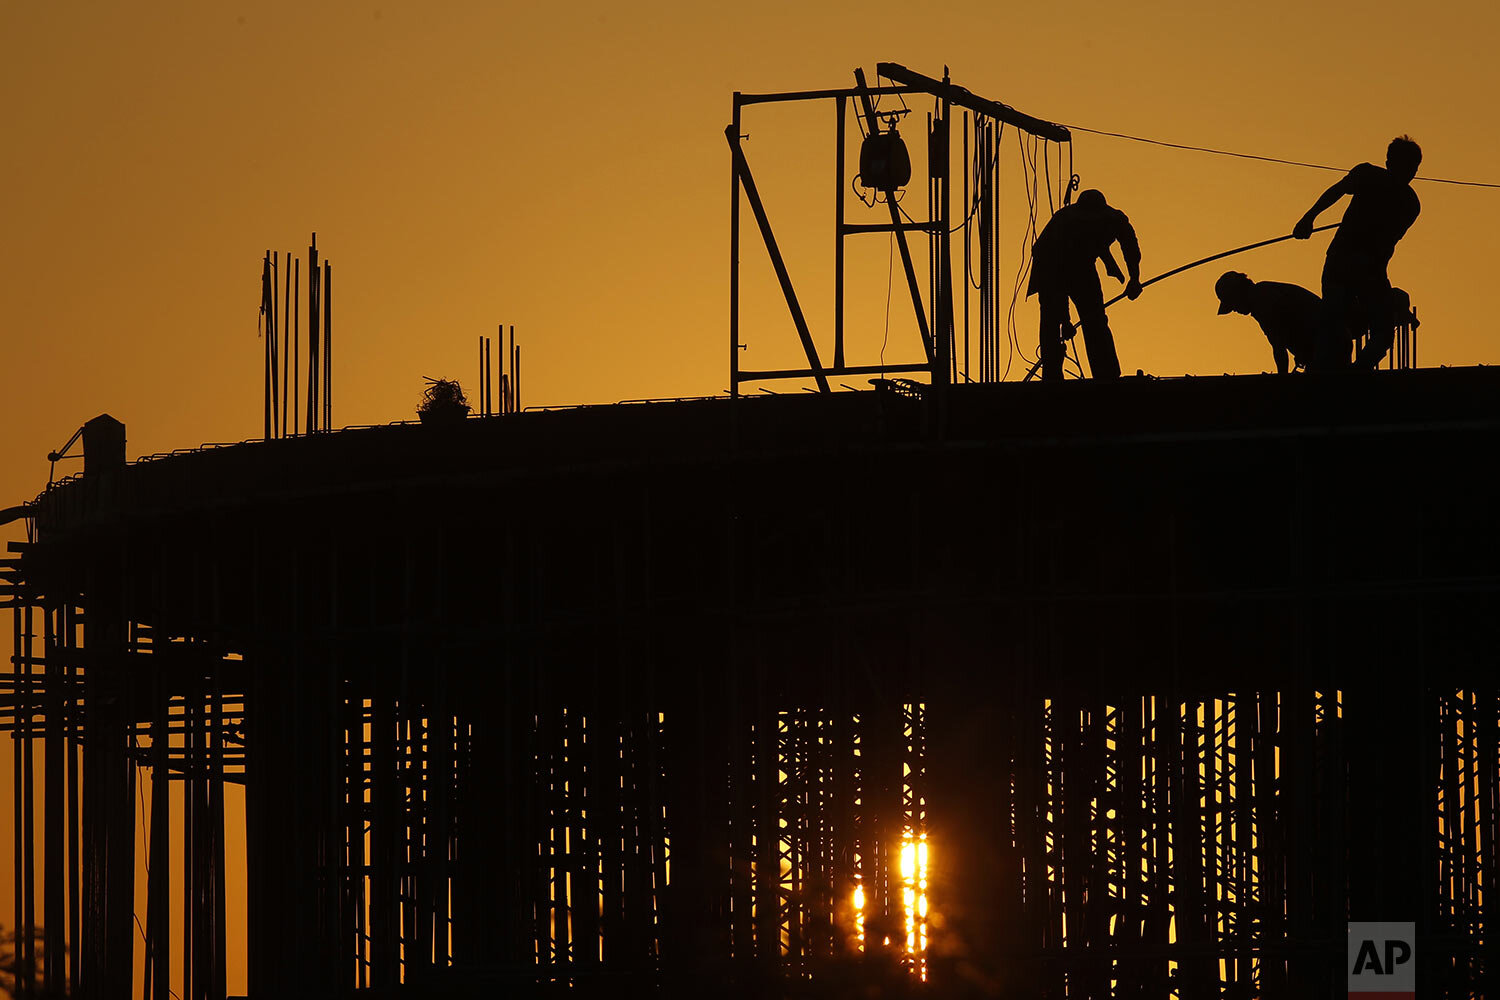  Workers are silhouetted at a building construction site near Phnom Penh, Cambodia, Thursday, Dec. 26, 2019. (AP Photo/Heng Sinith) 